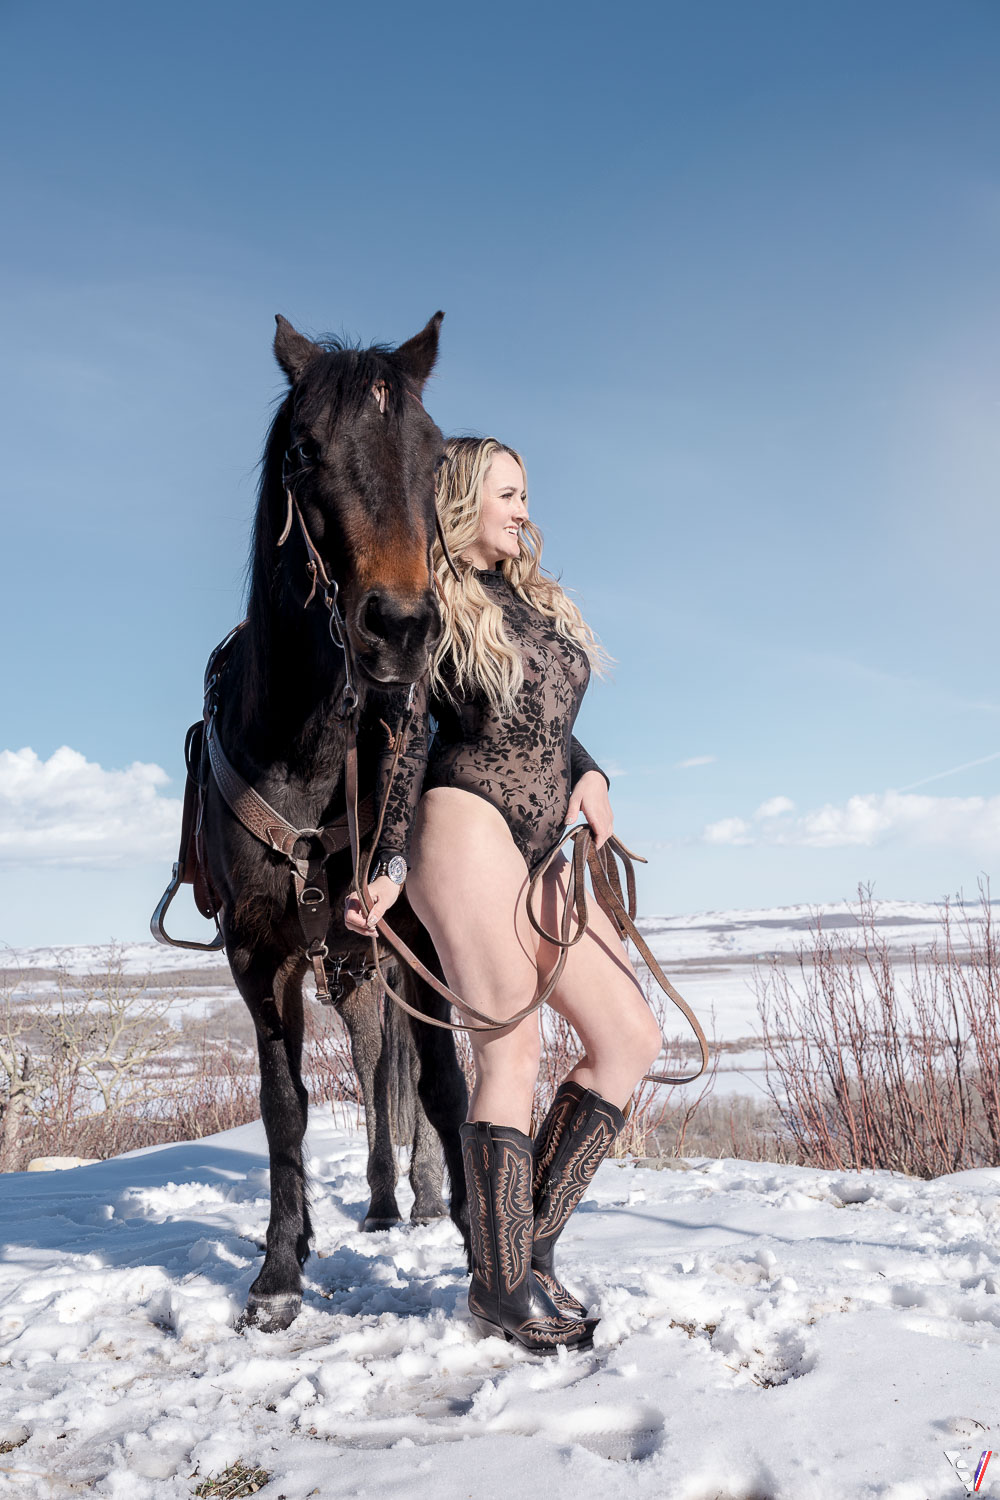 A lace bodysuit and cowboy boots are used to pose next to the horse. 